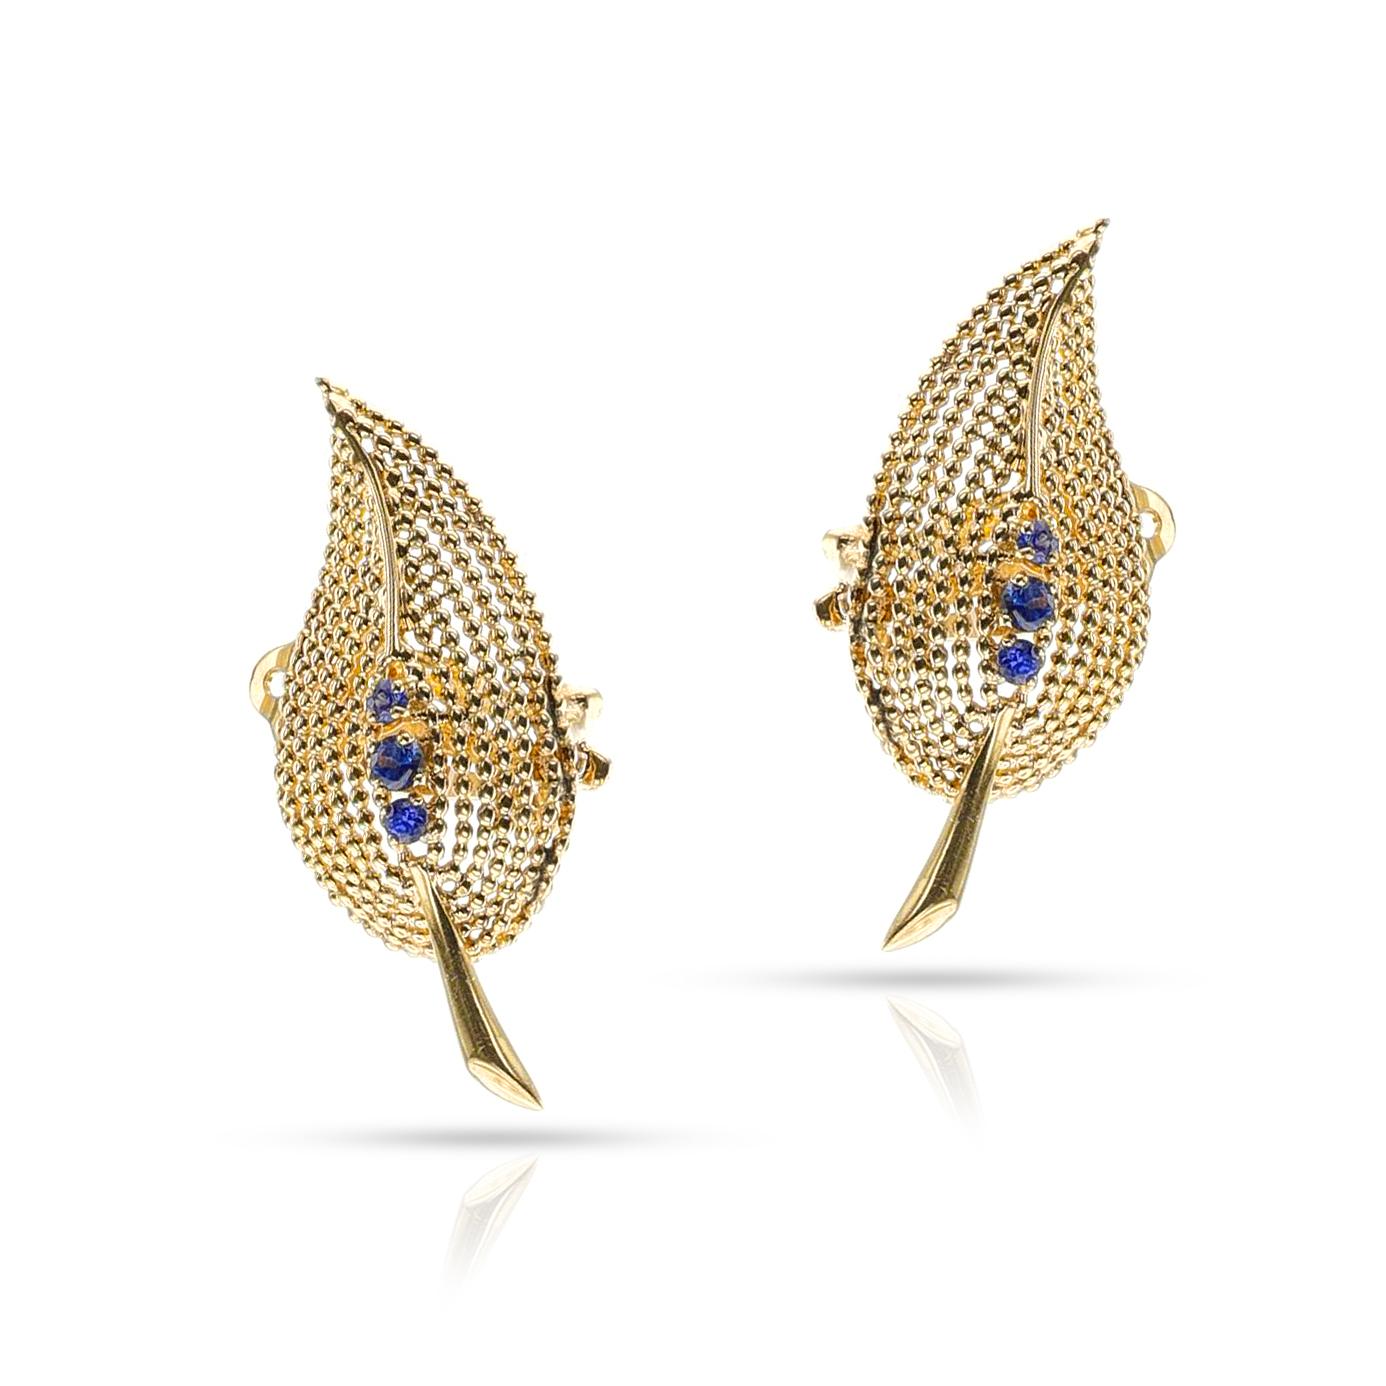 A set of 14k yellow gold Tiffany & Co. Sapphire Leaf Earrings make the perfect addition of elegance and luxury to any ensemble. The total weight of the earring is 7.29 grams. 